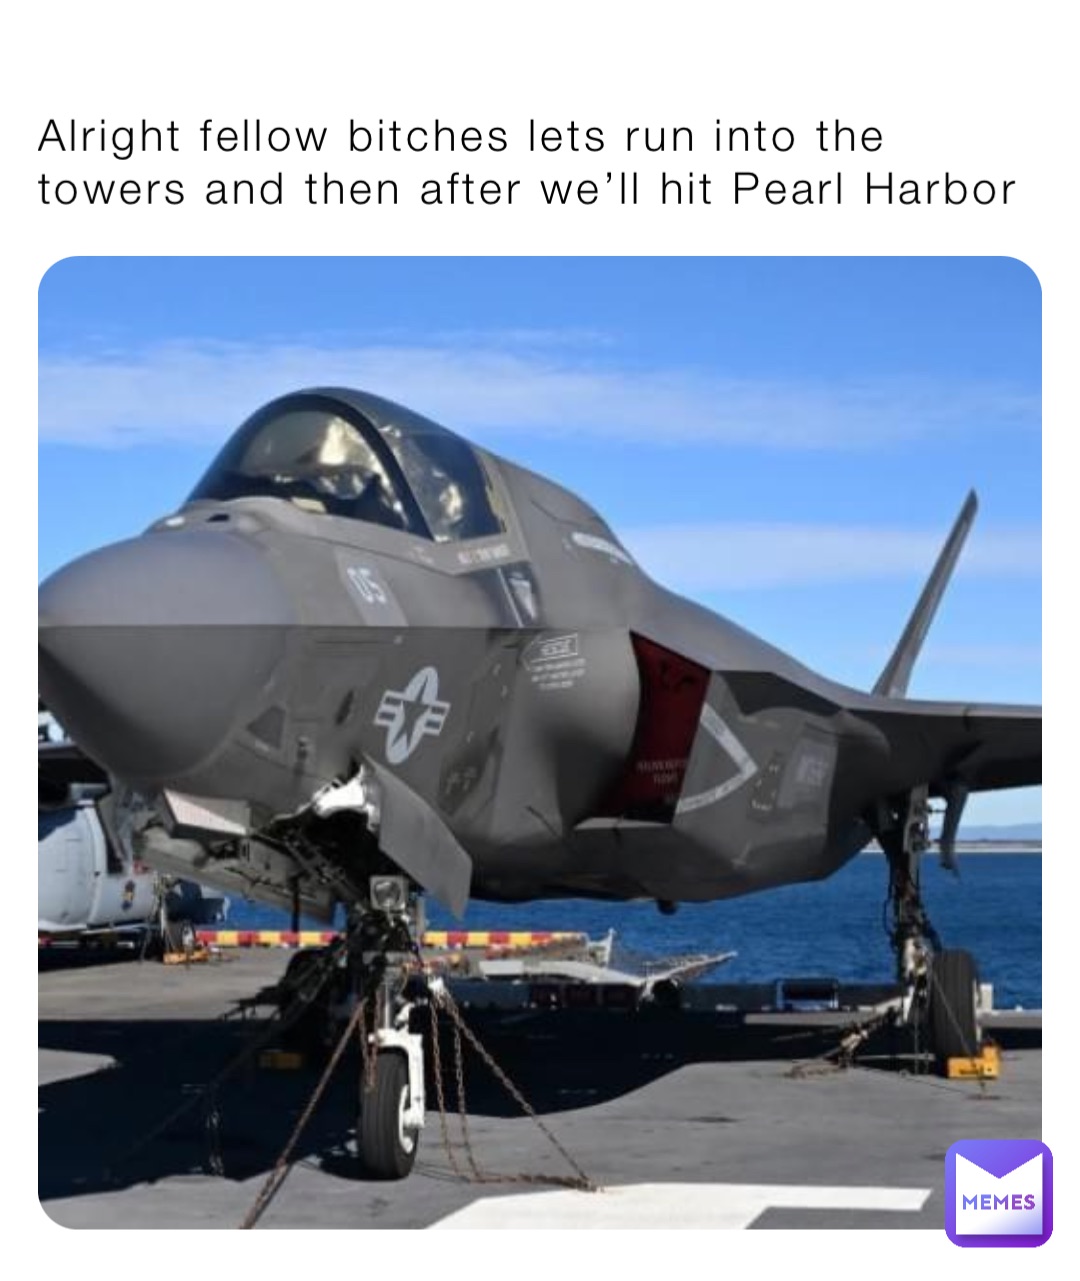 Alright fellow bitches lets run into the towers and then after we’ll hit Pearl Harbor